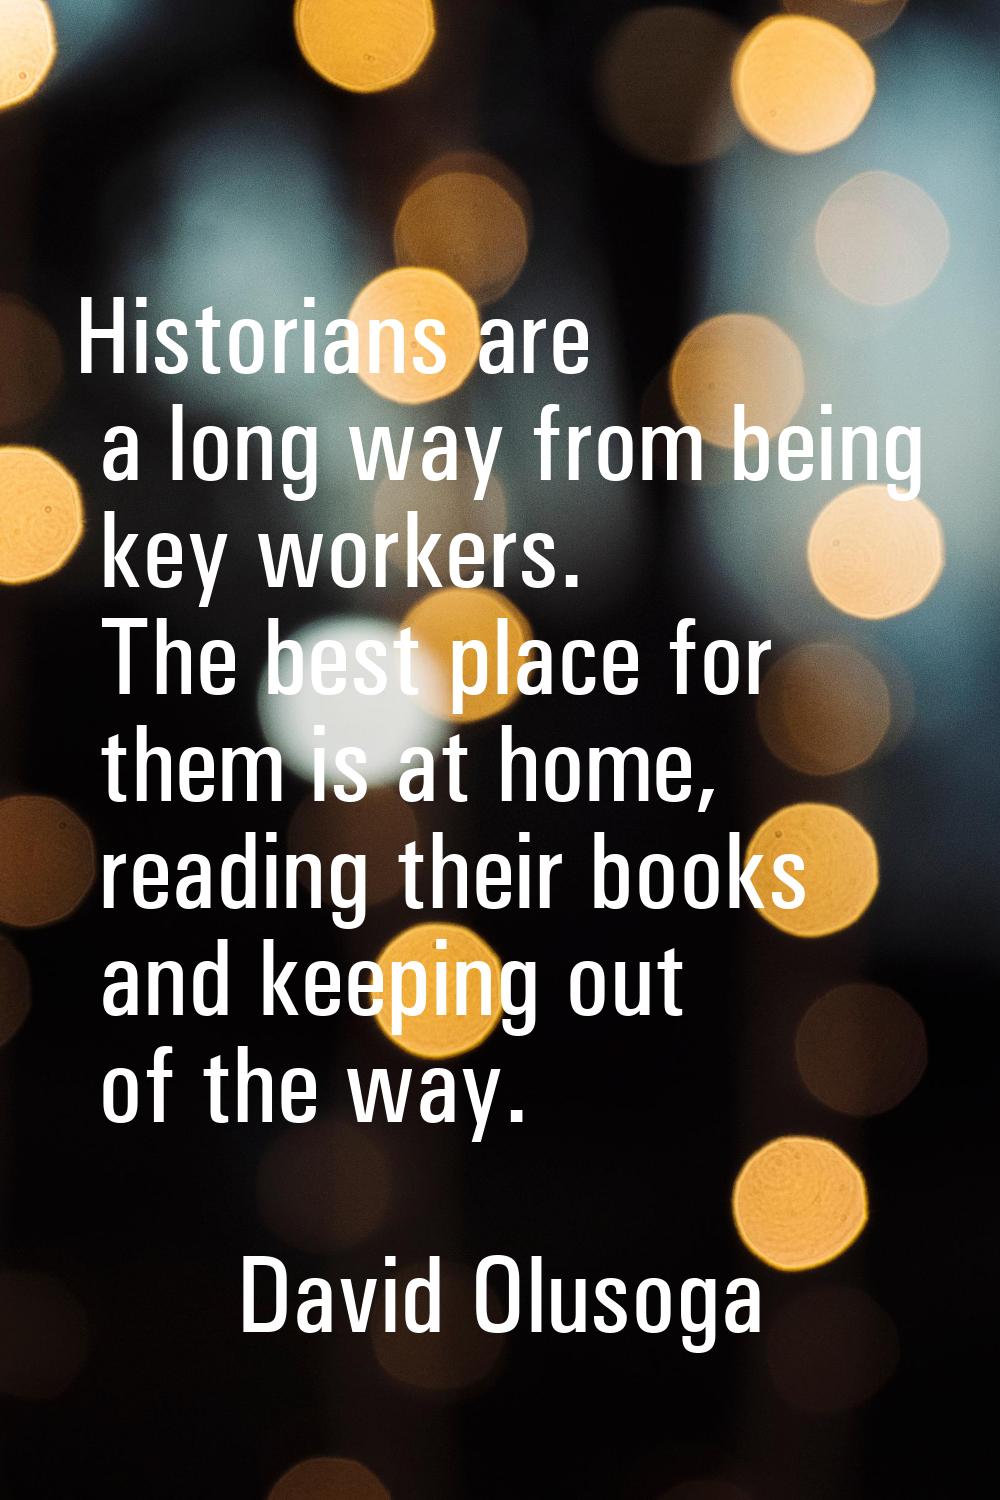 Historians are a long way from being key workers. The best place for them is at home, reading their